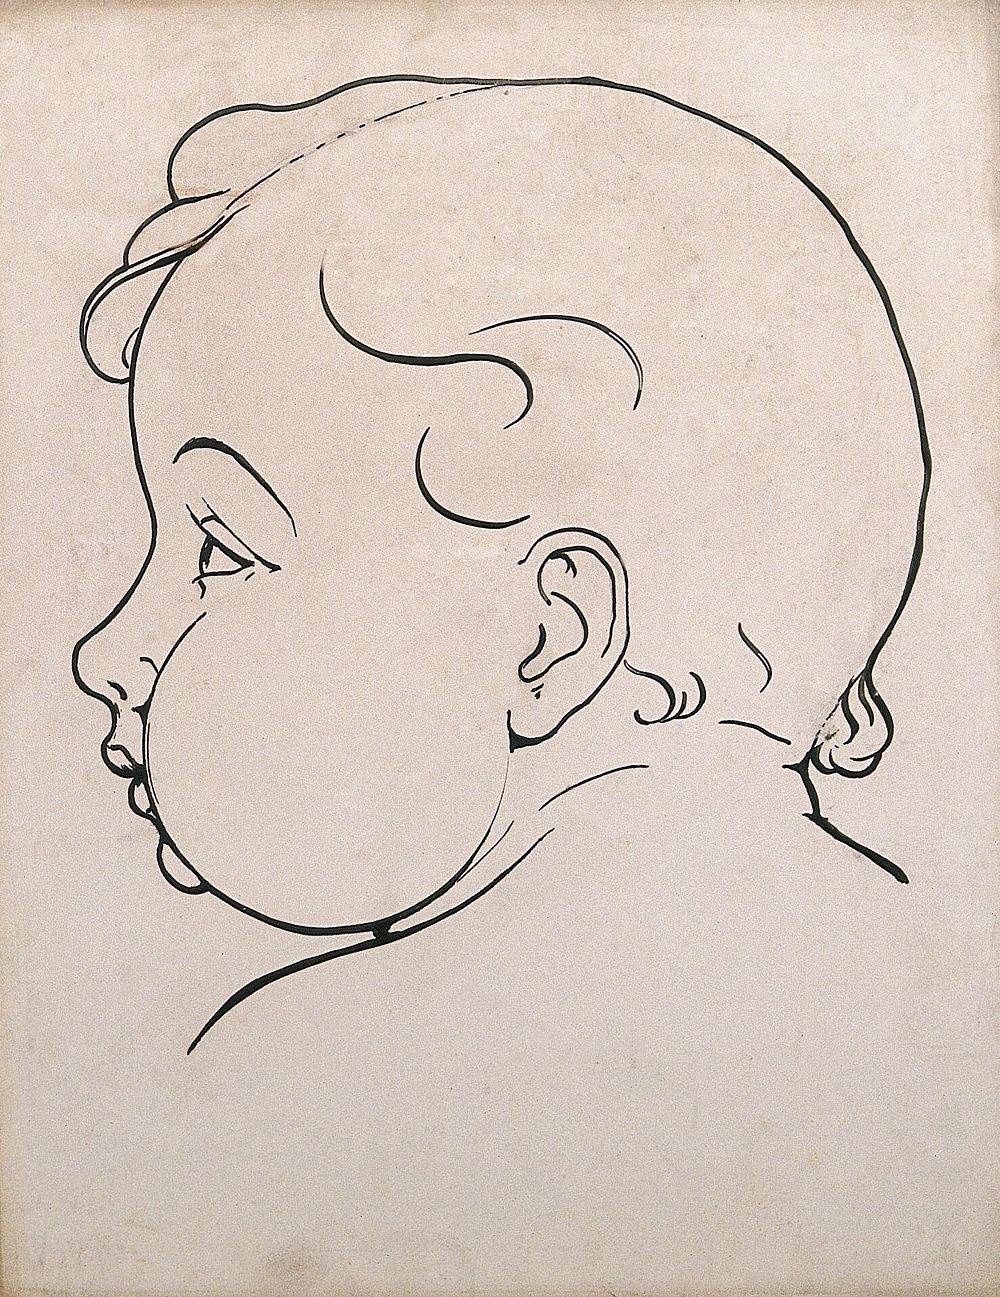 Child's head, with fat cheeks: profile. Drawing, c. 1900.